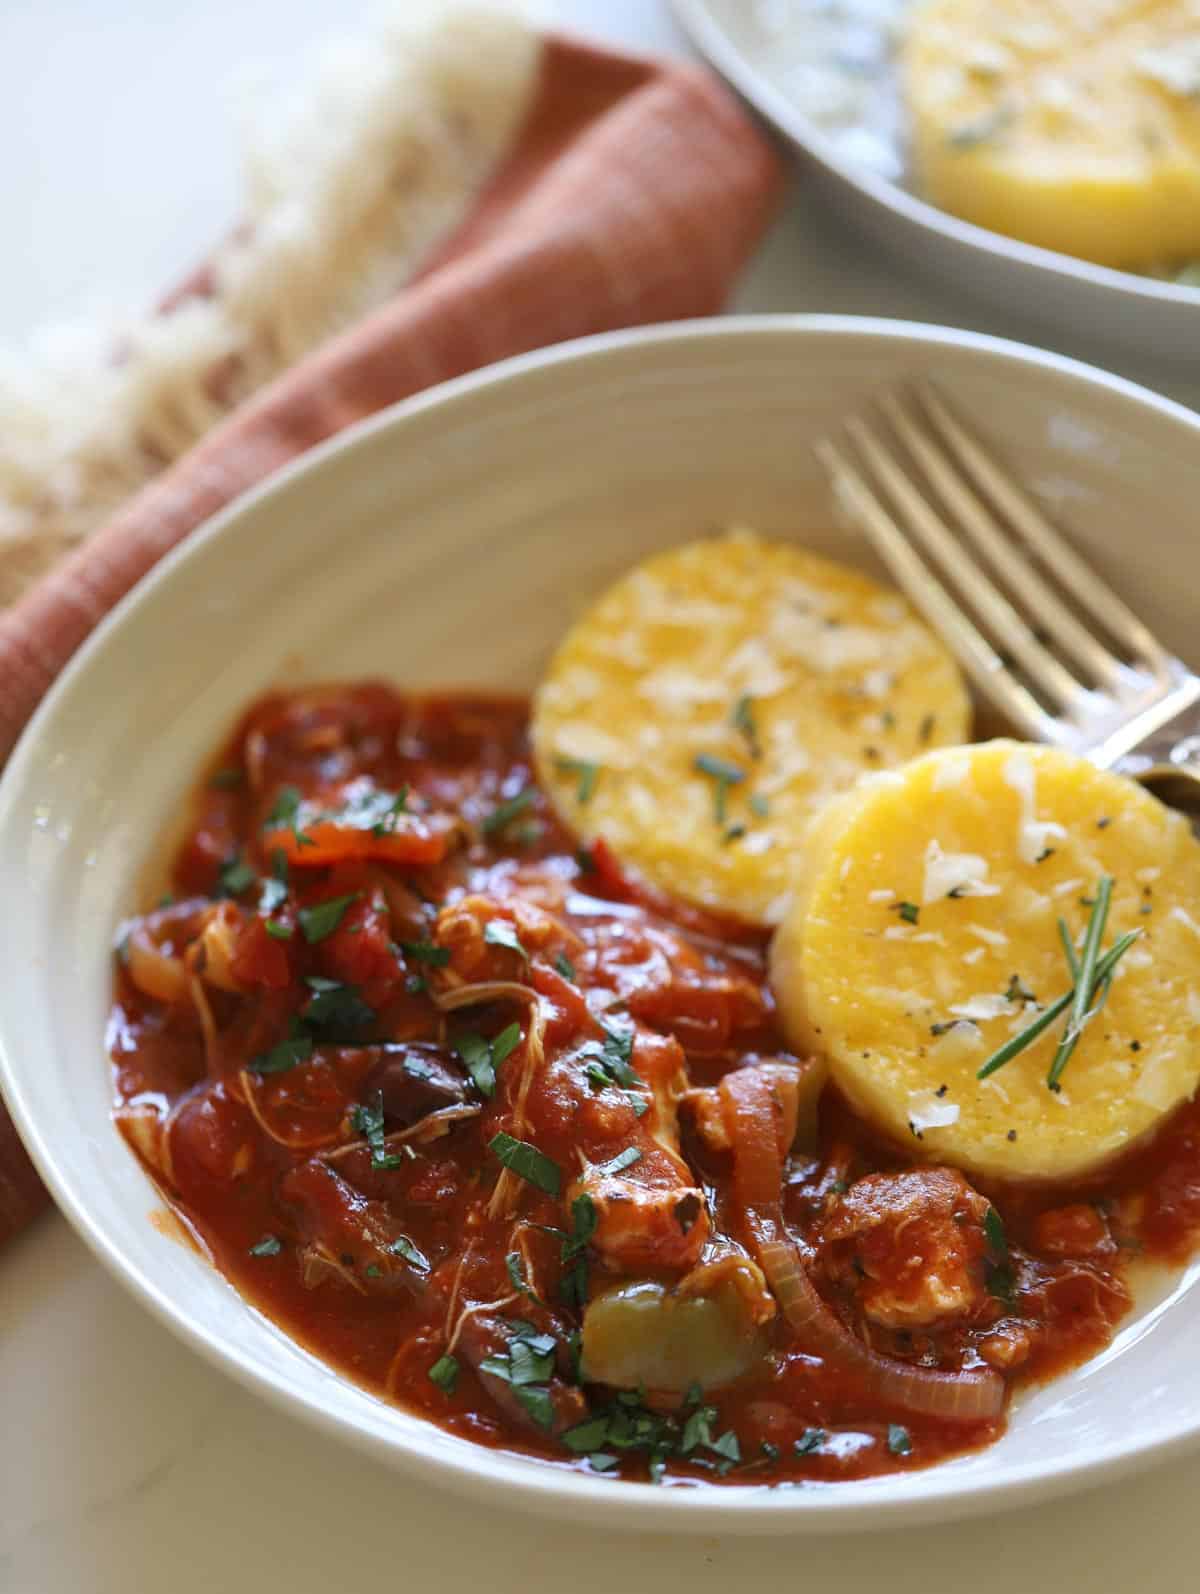 Chicken cacciatore with polenta cakes in a bowl